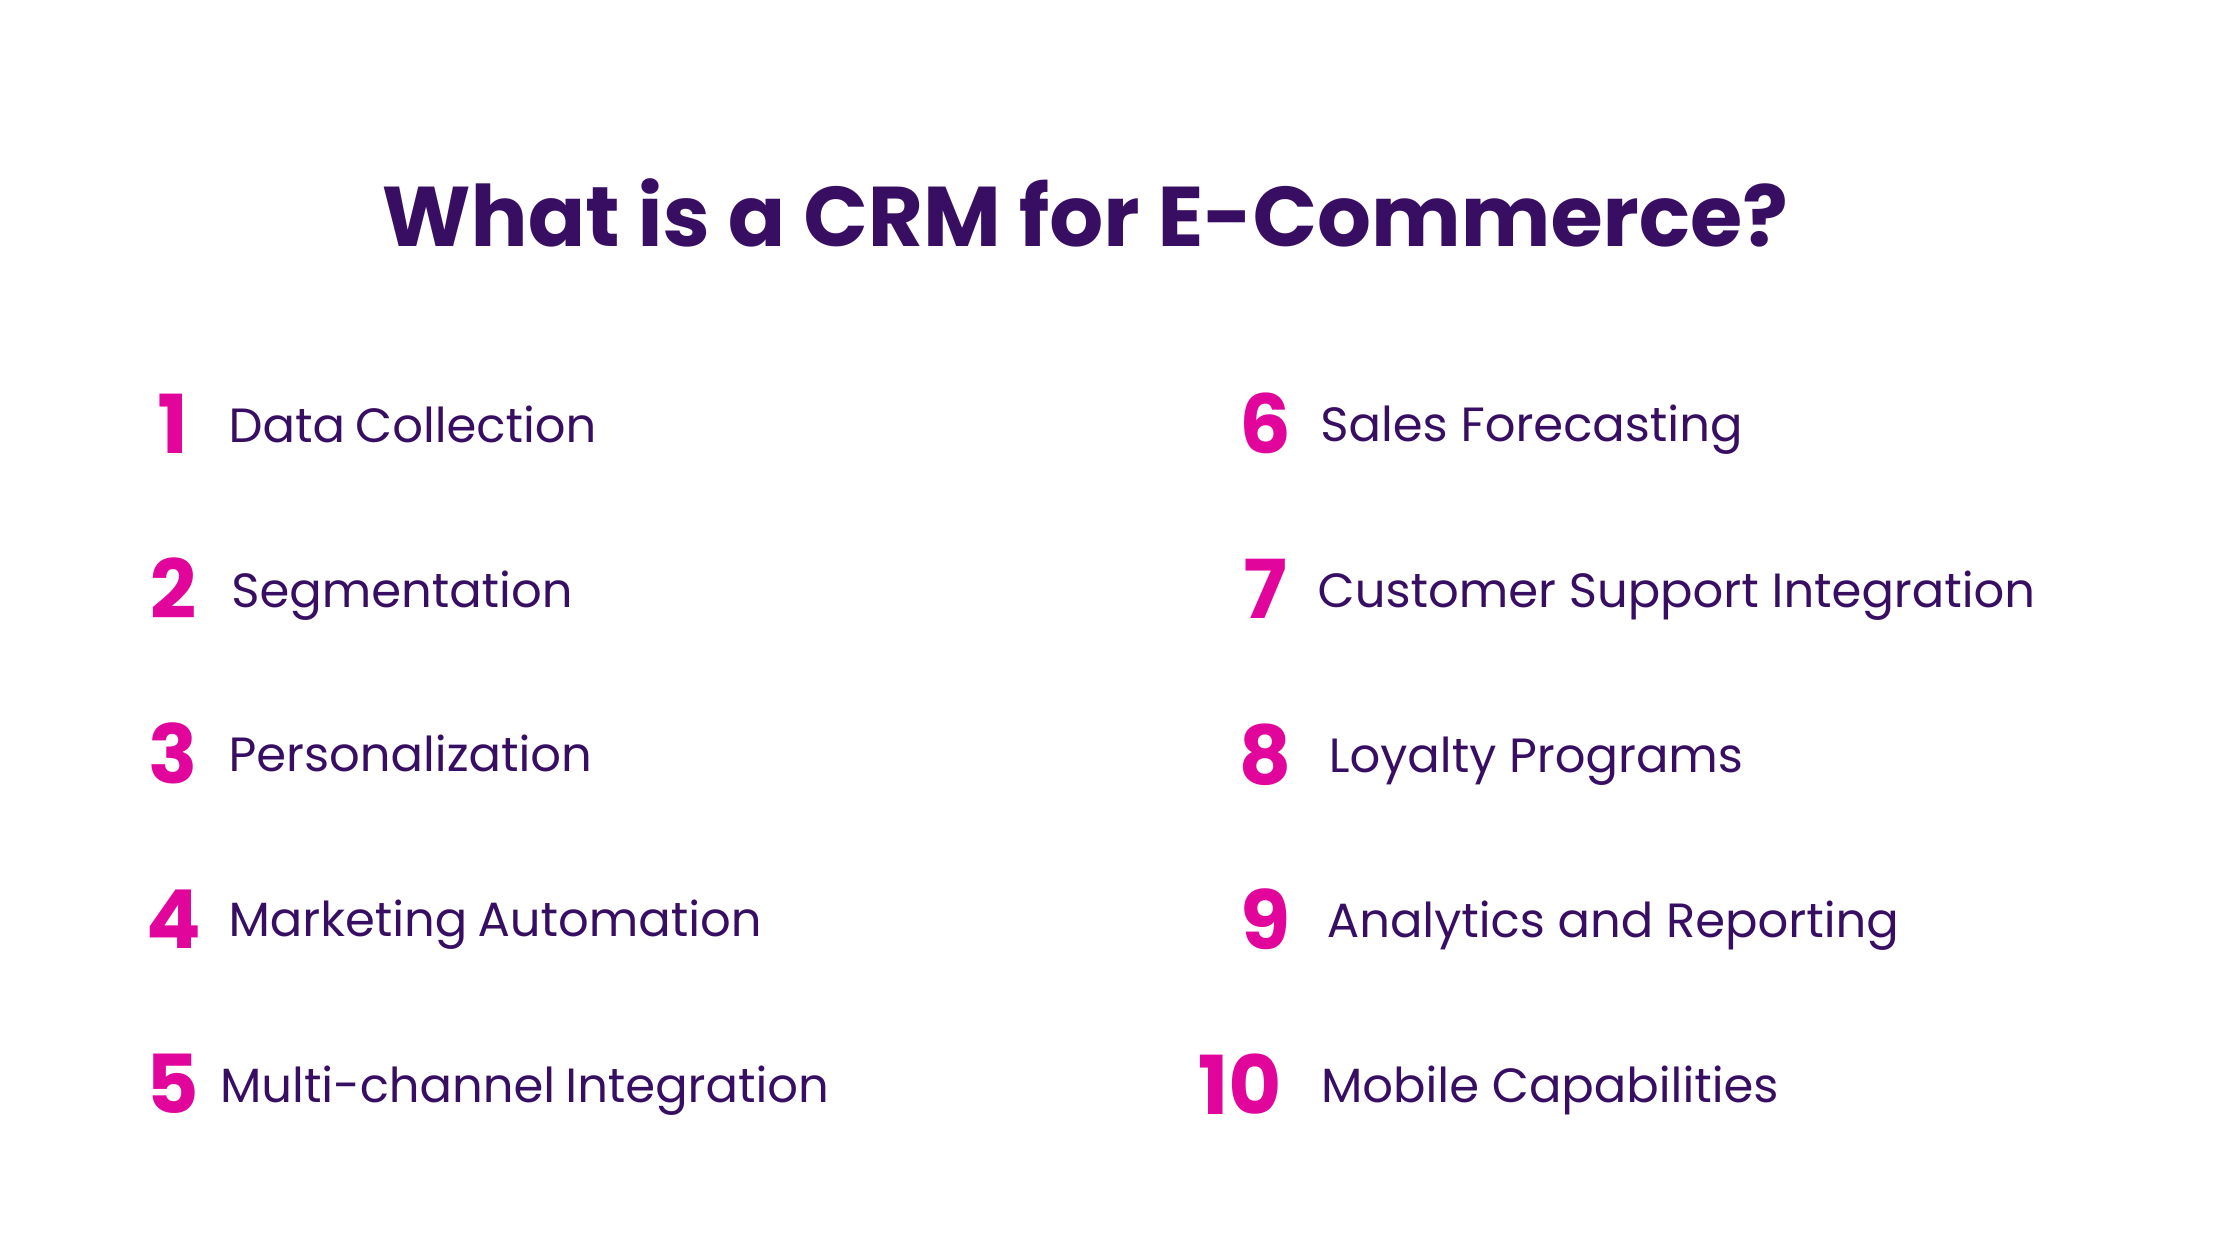 What is a CRM for E-Commerce?